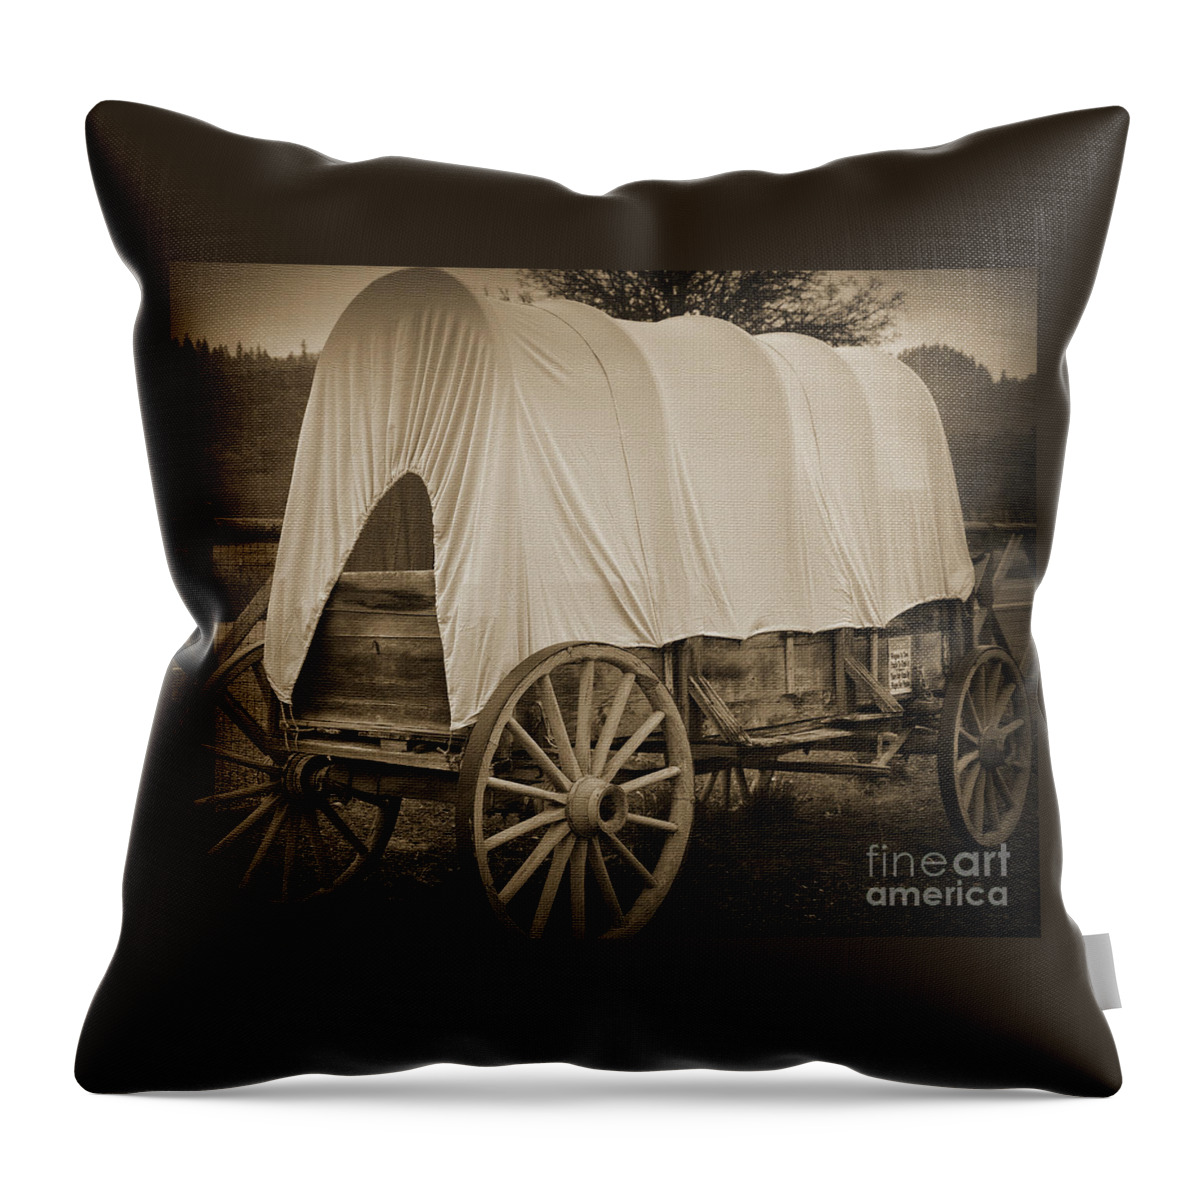 Sepia Throw Pillow featuring the digital art Old Covered Wagon by Kirt Tisdale